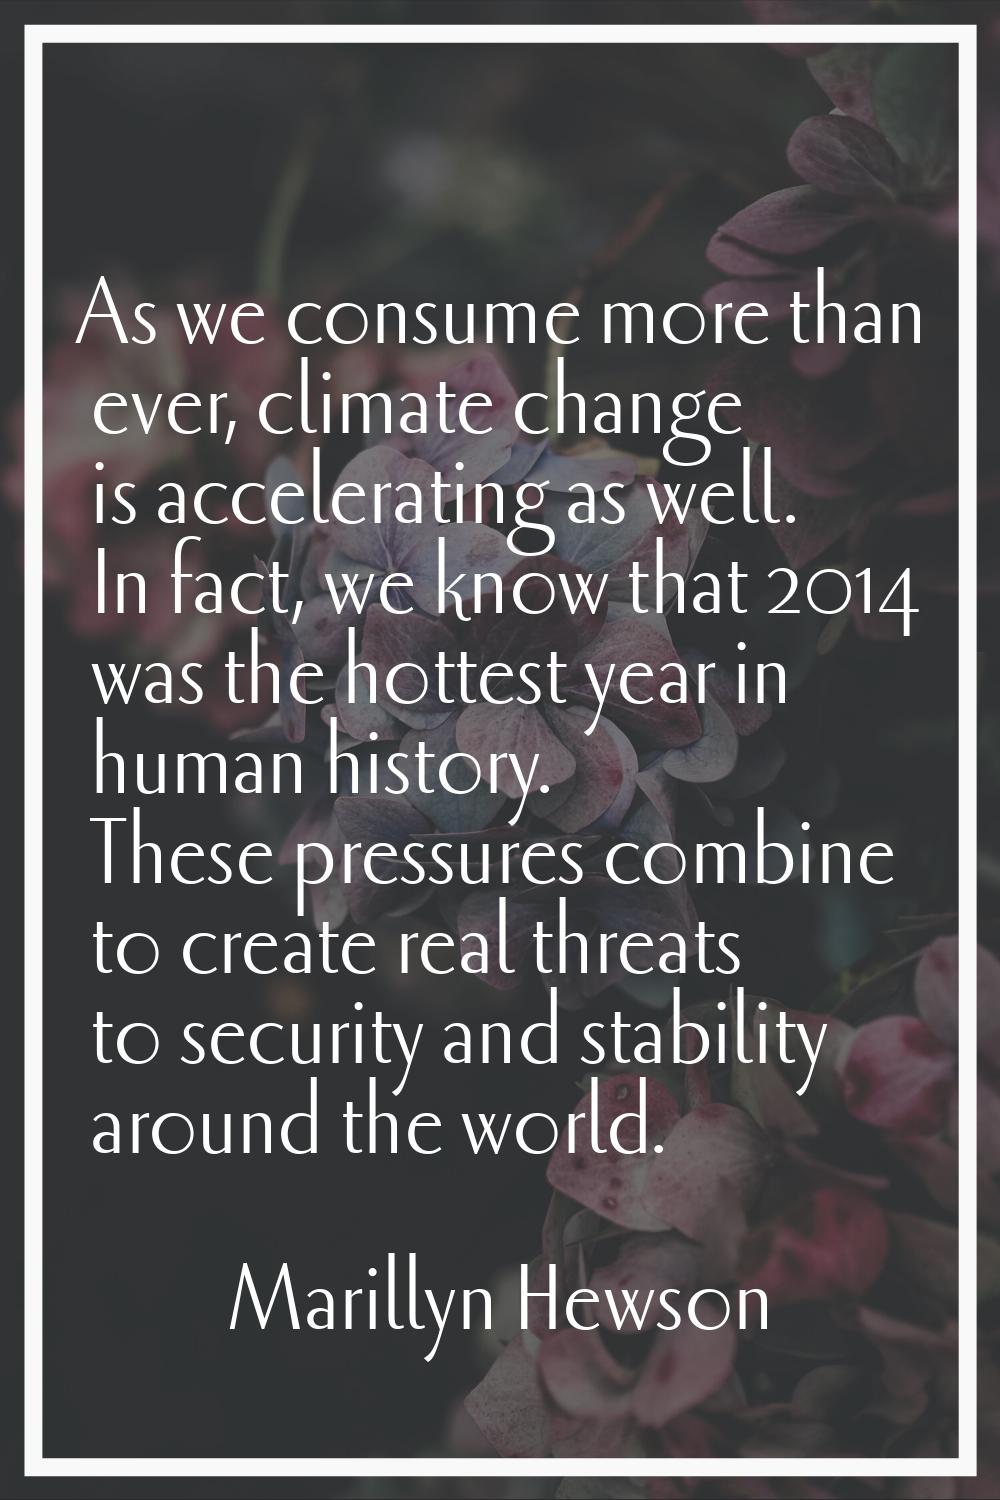 As we consume more than ever, climate change is accelerating as well. In fact, we know that 2014 wa